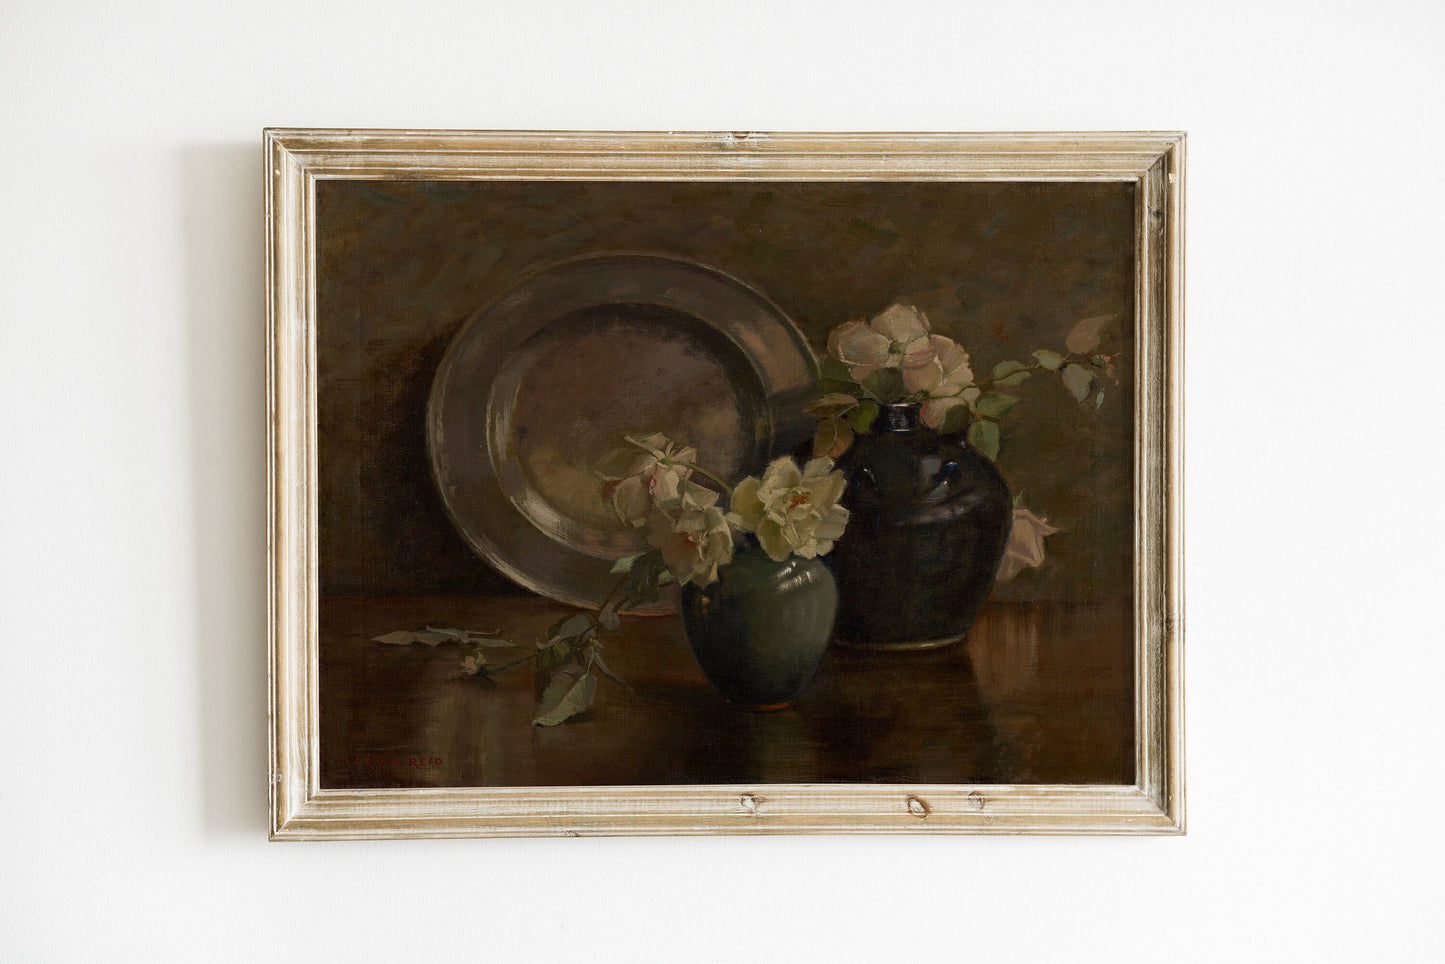 Moody Rustic Charm: Vintage Art Collection